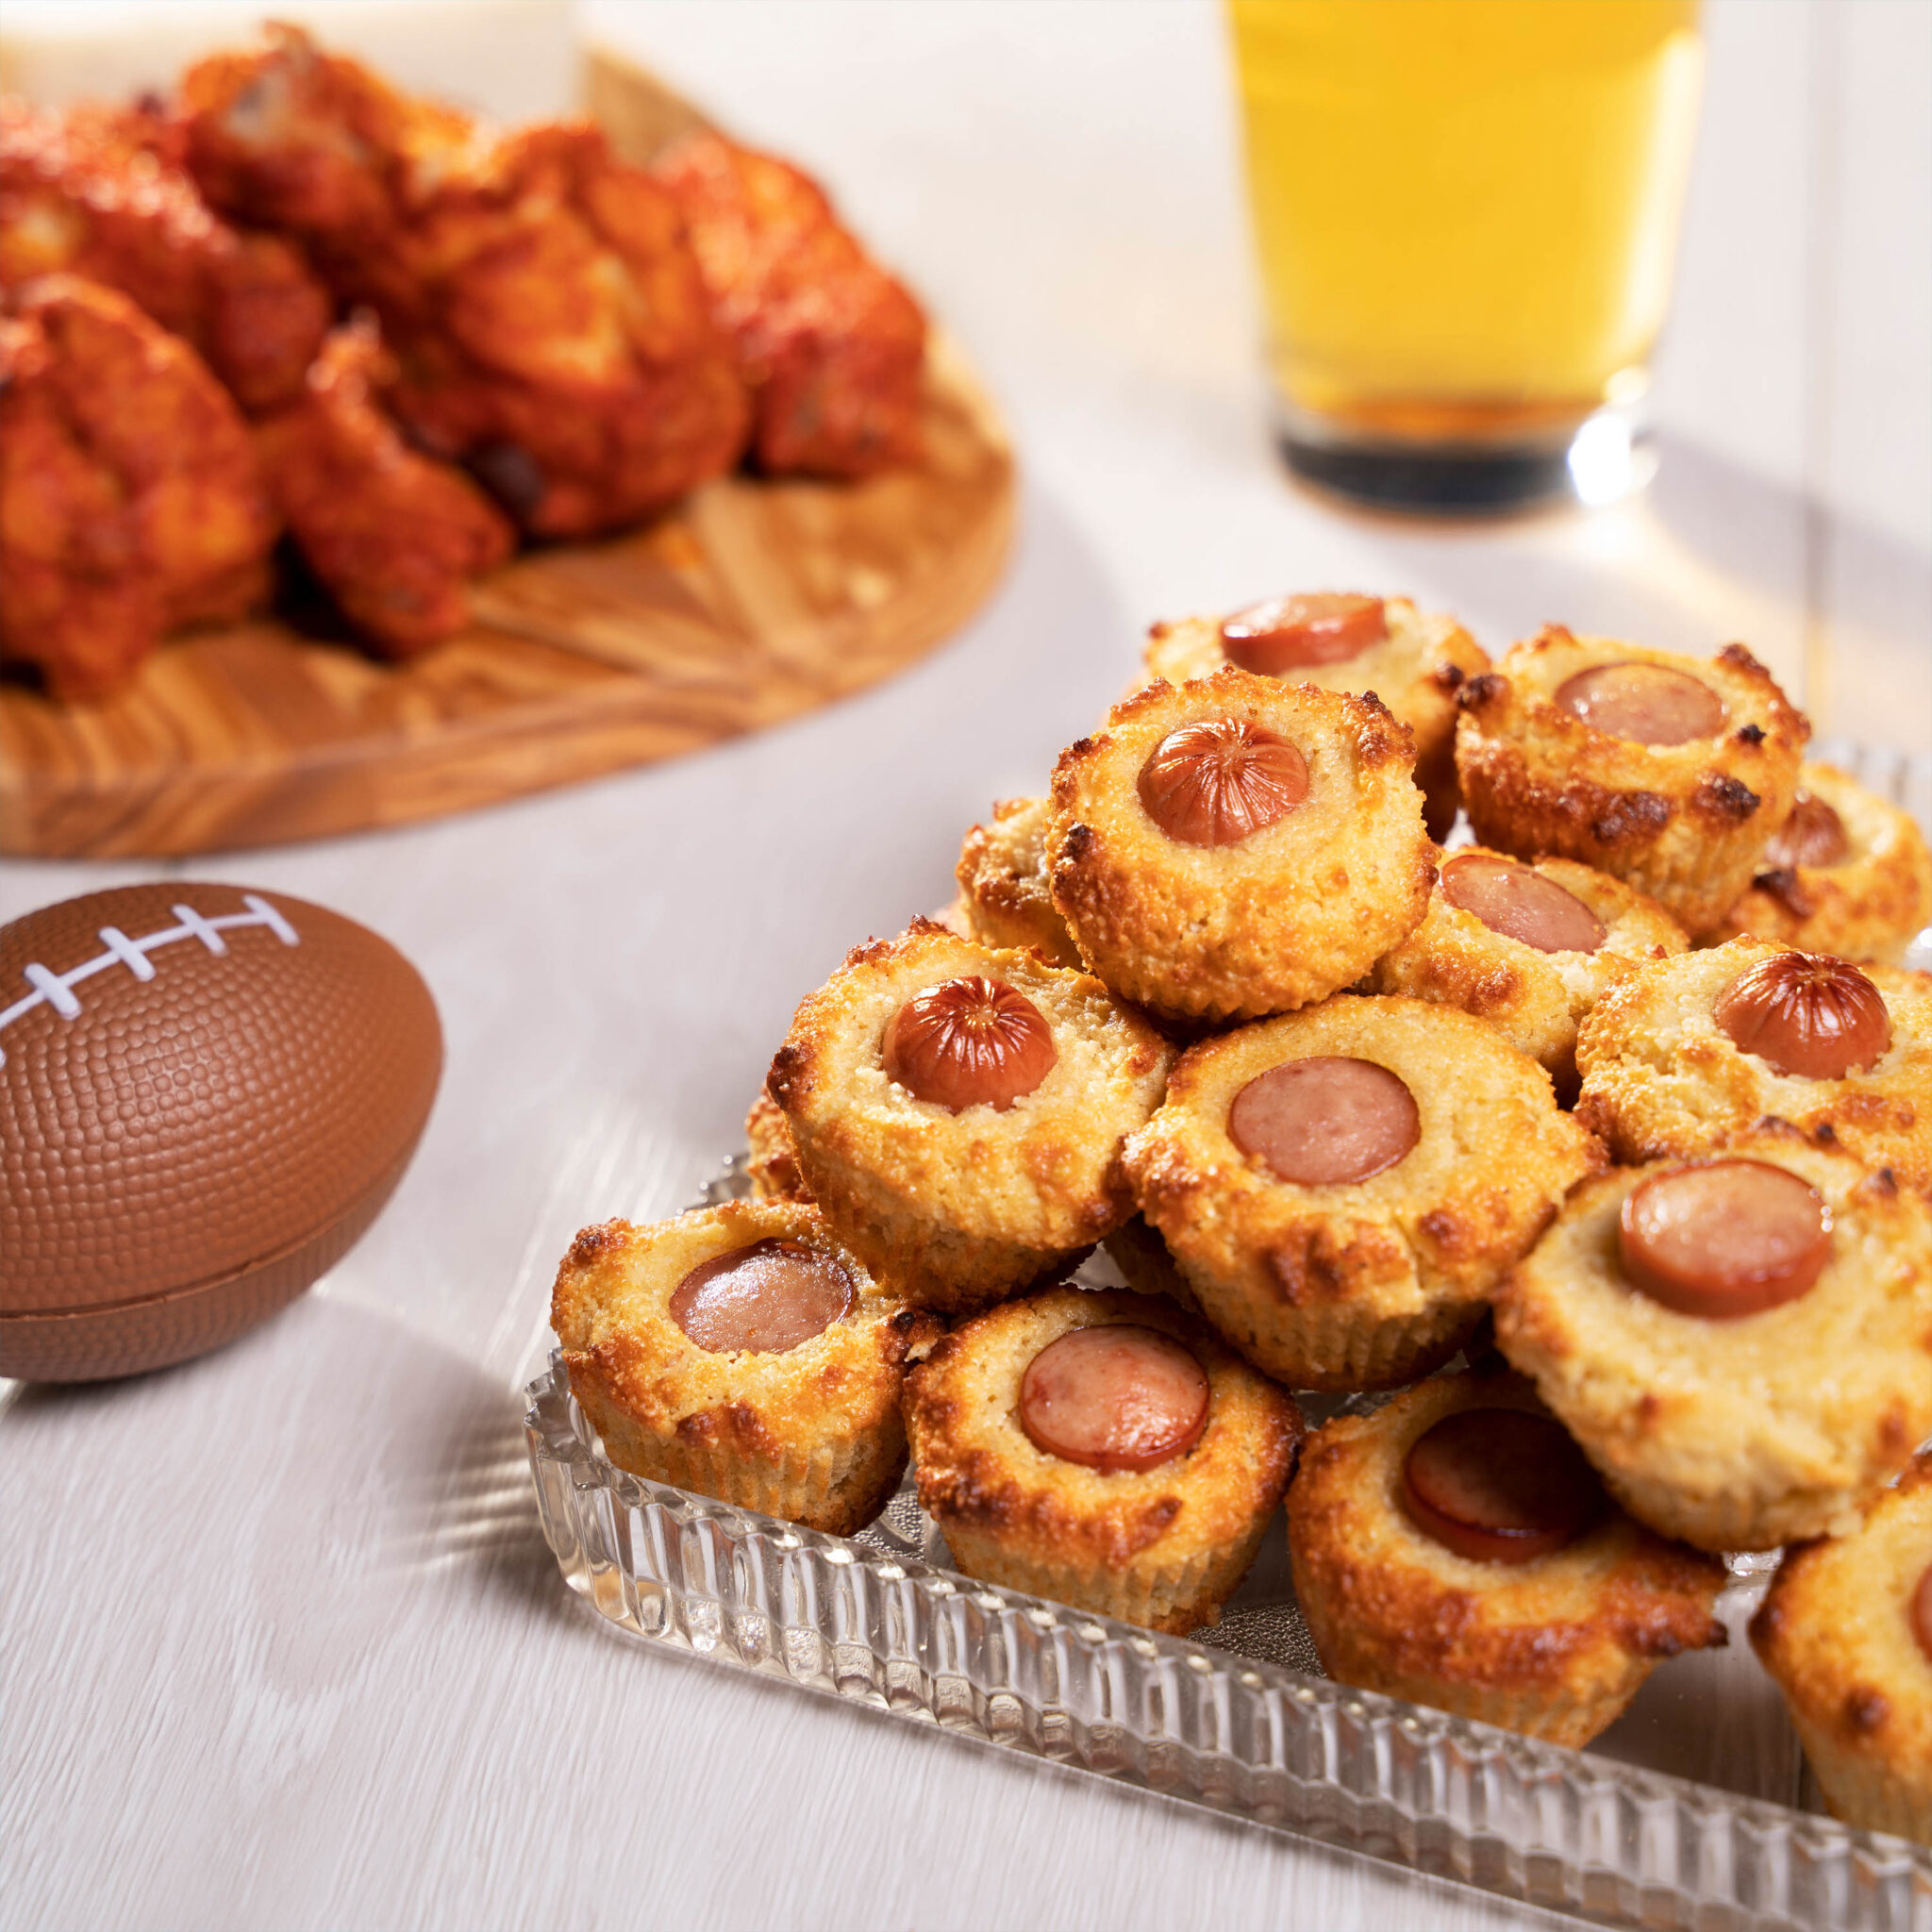 BC_Creations-SuperbowlSnack